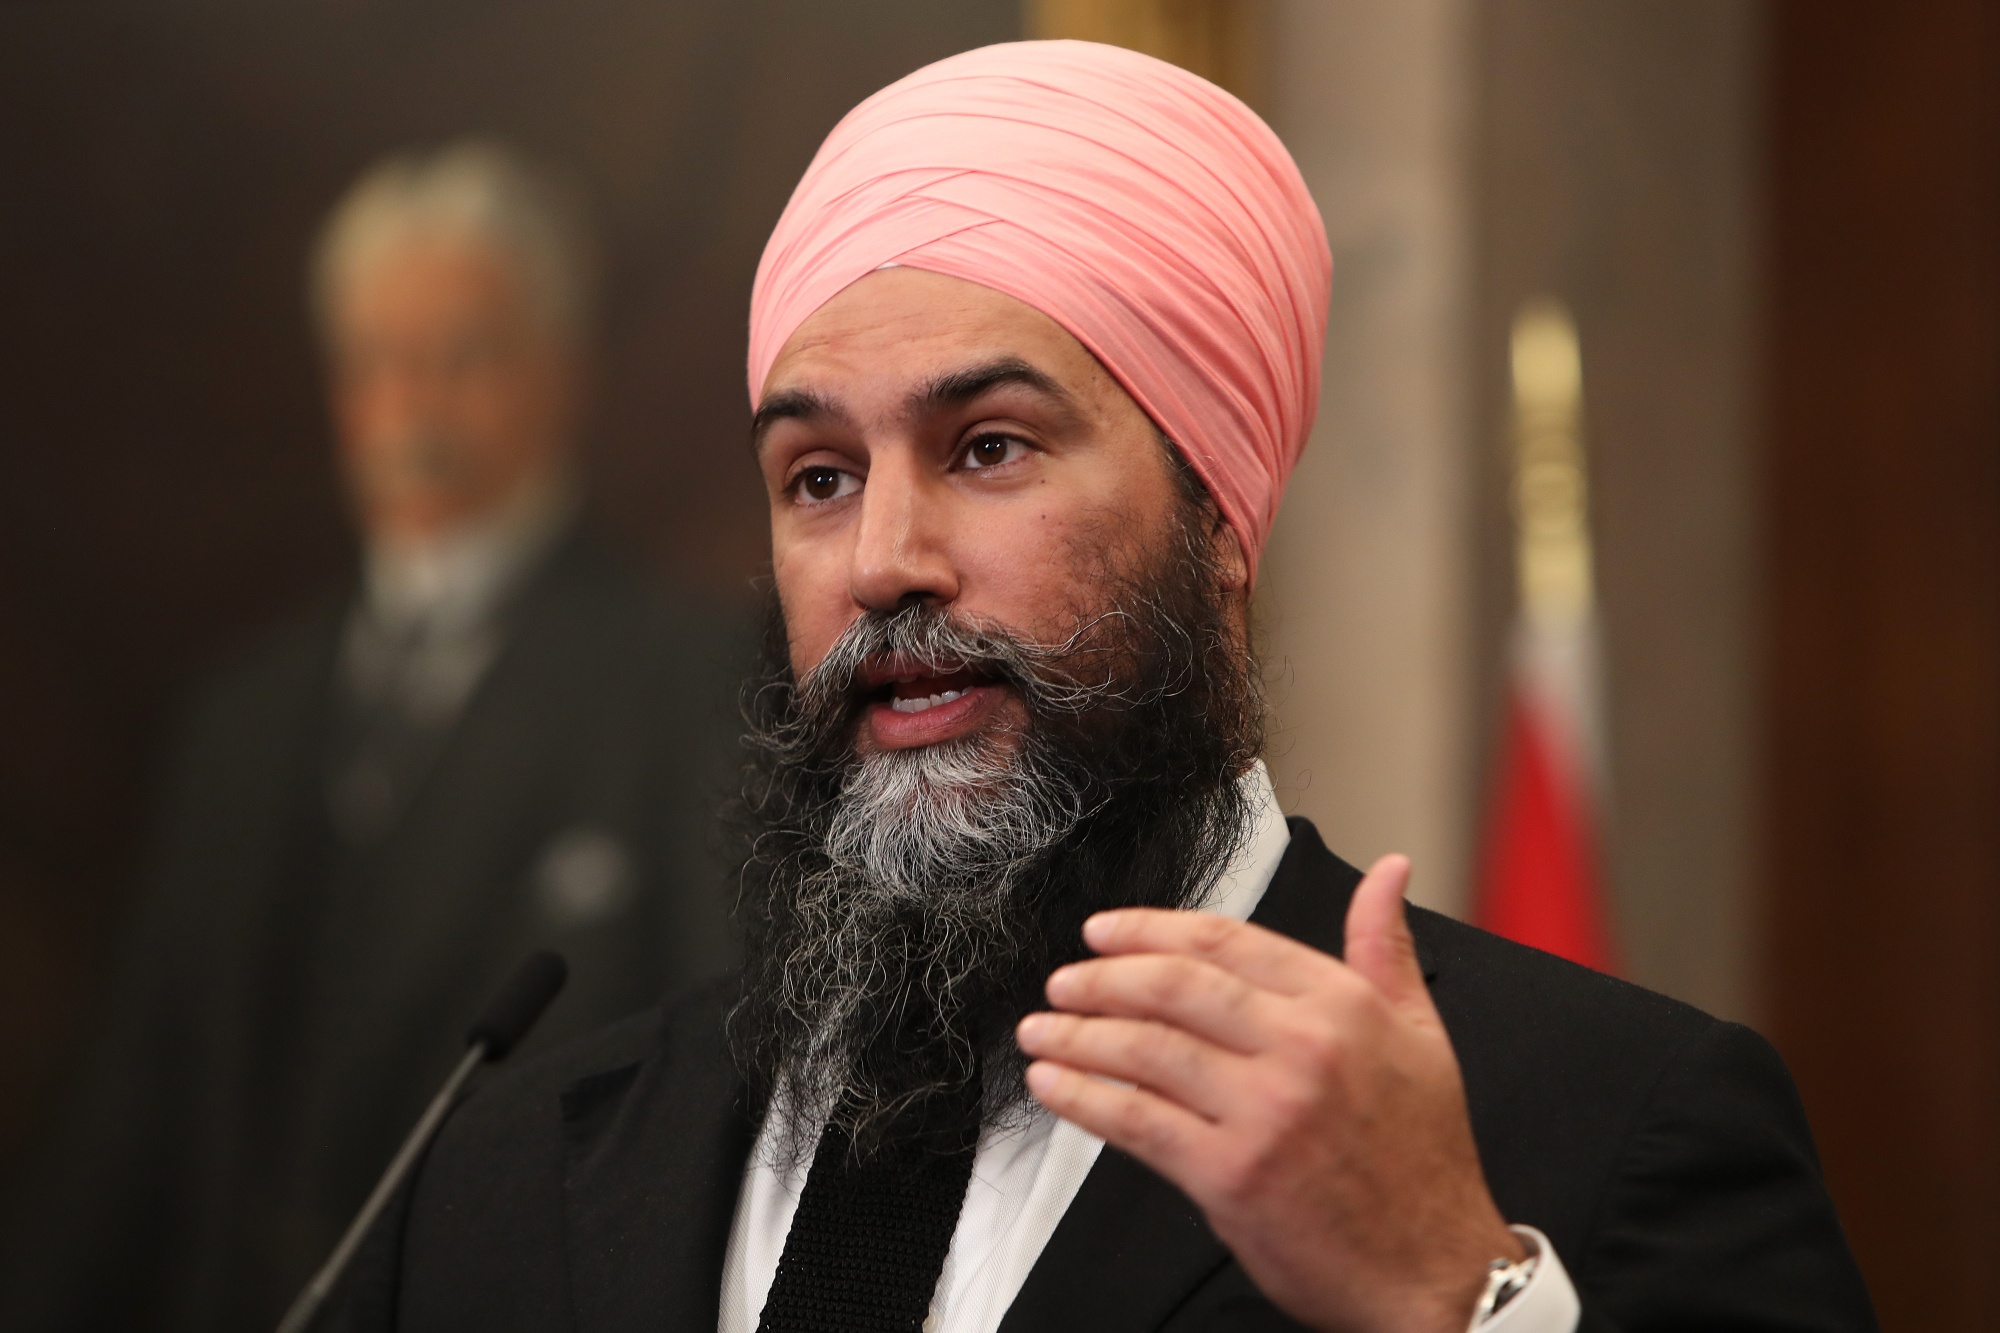 Inflation NDP Leader Jagmeet Singh Proposes Tax on Excess Profits in